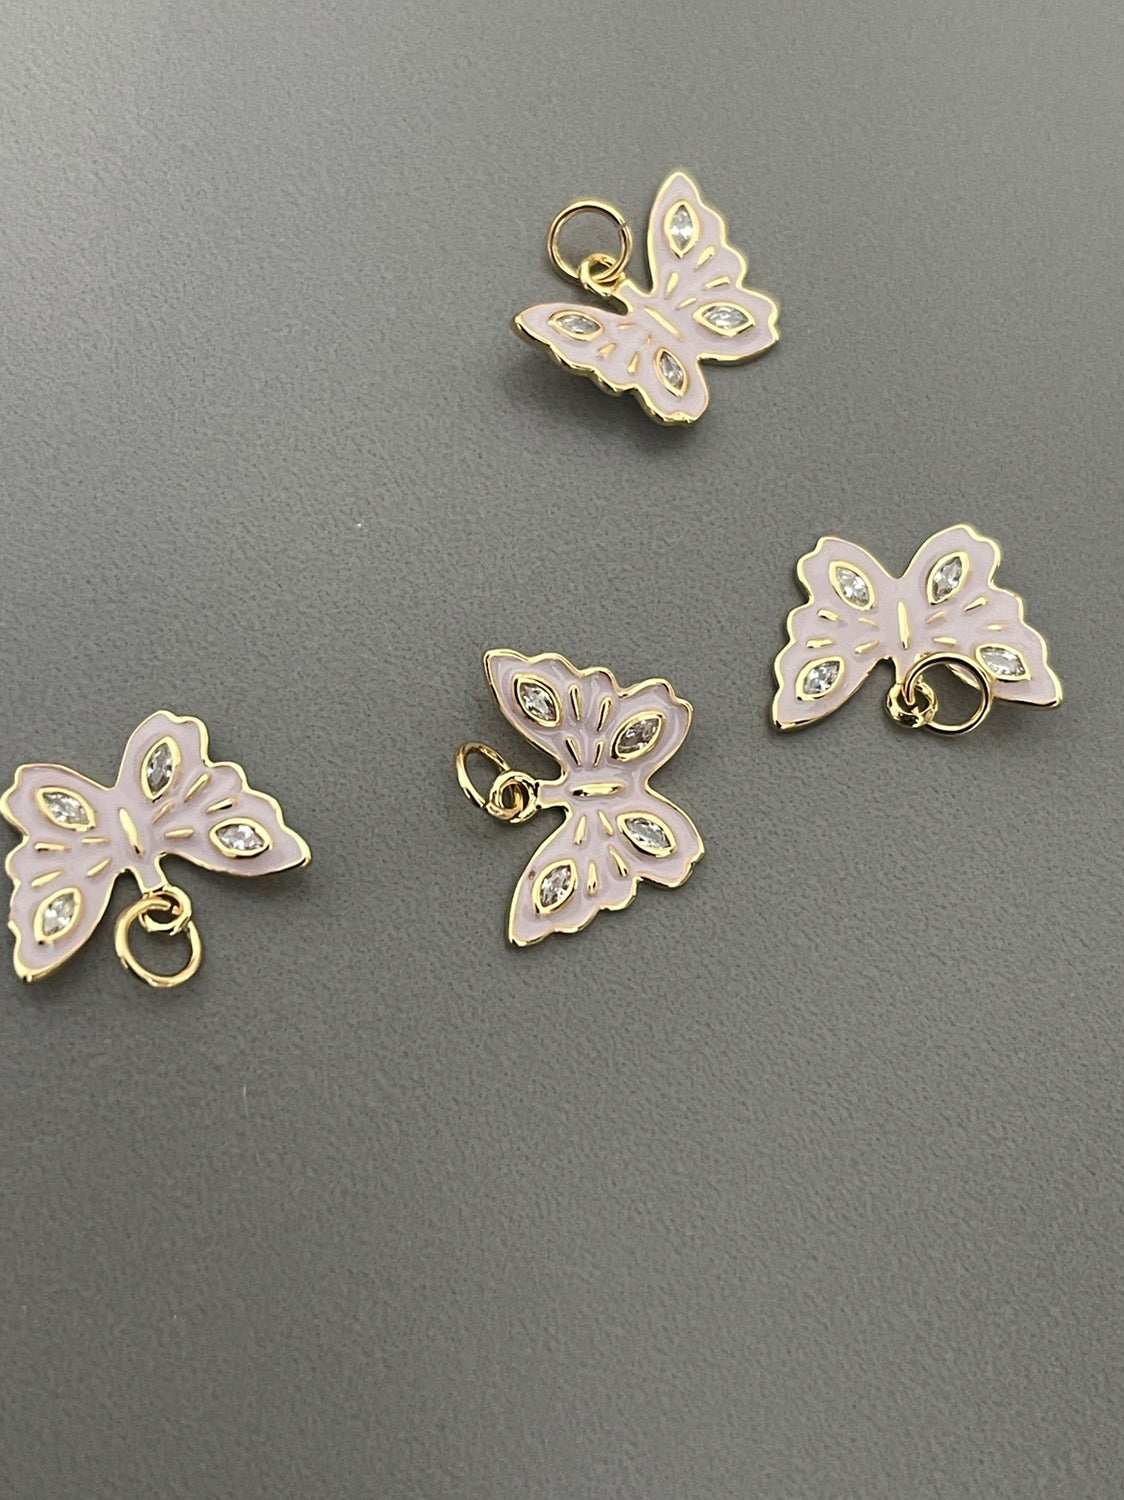 10mm butterfly charm 23648